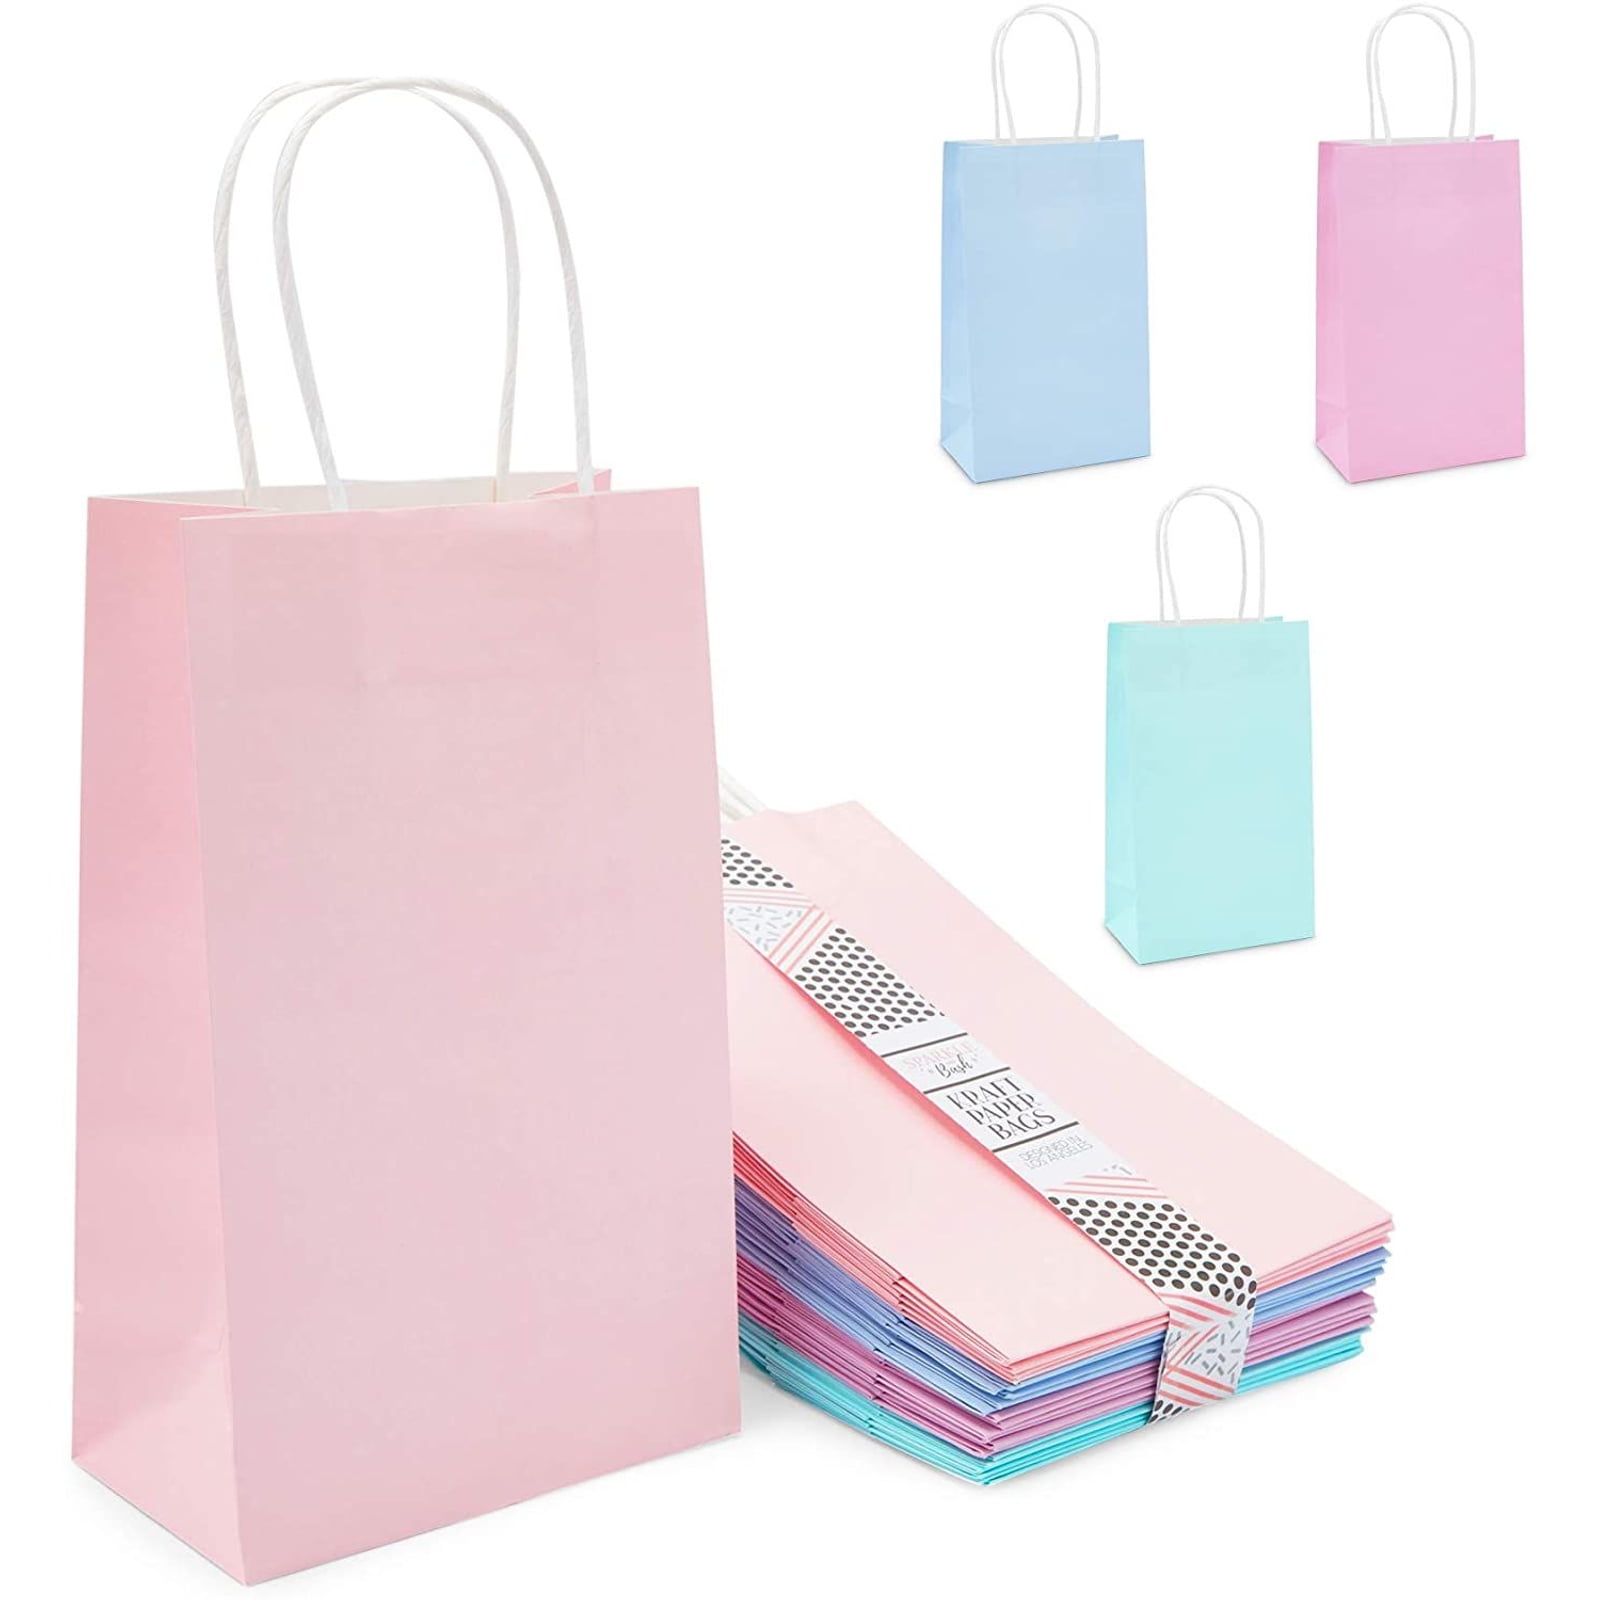 20x18x8cm Light Pink Paper Party Loot Bag Wedding Favour Gift Bags /& Tissue